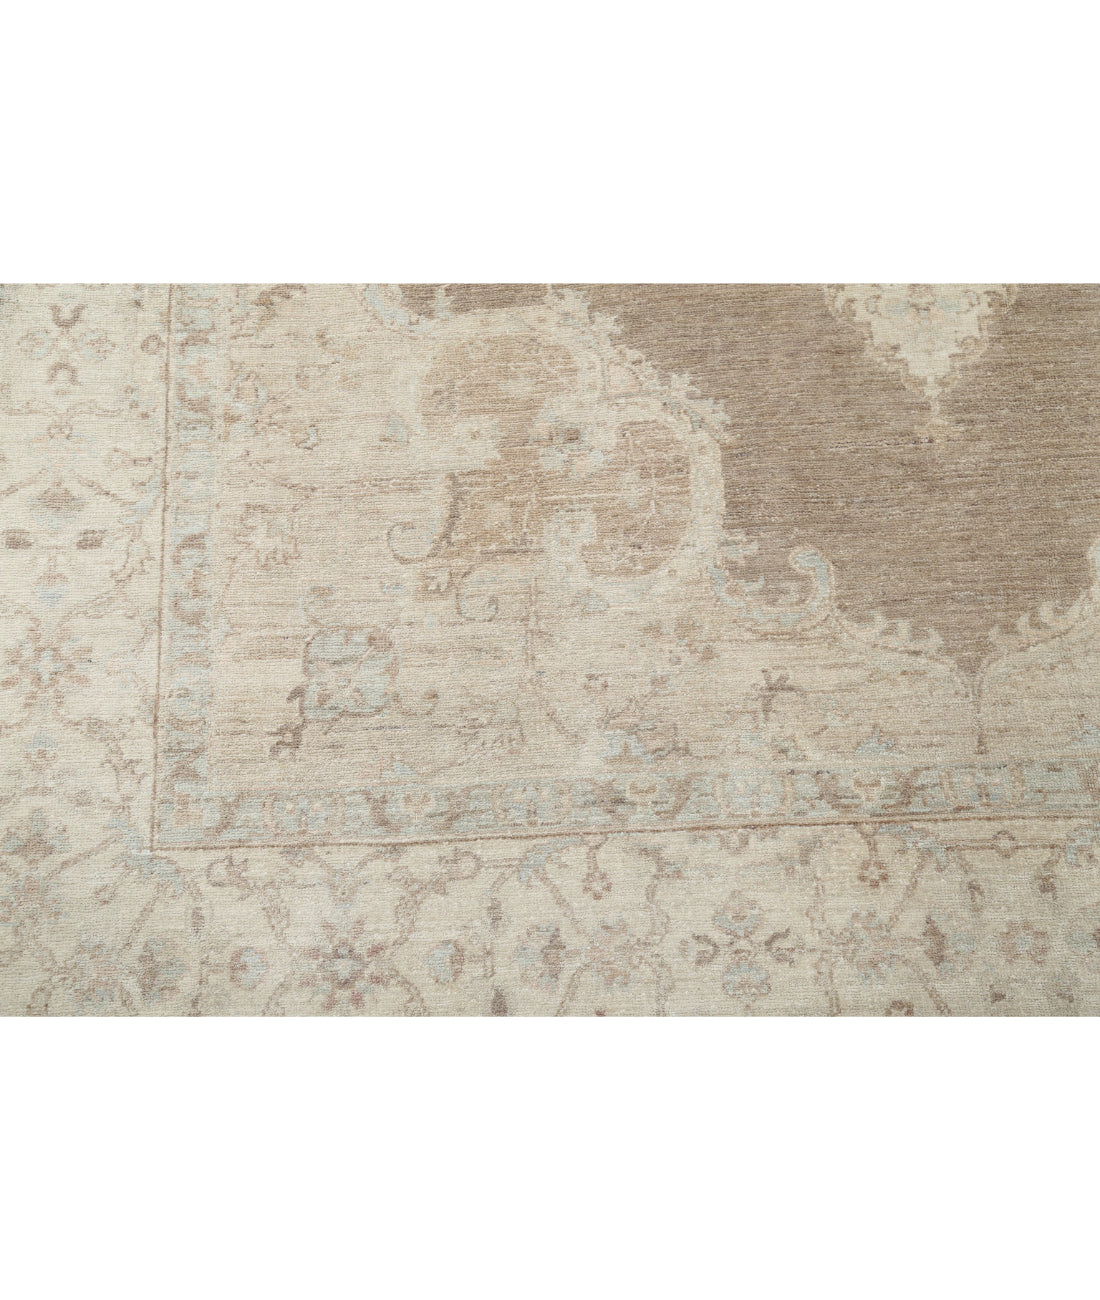 Hand Knotted Serenity Wool Rug - 6'7'' x 10'4'' 6'7'' x 10'4'' (198 X 310) / Brown / Ivory